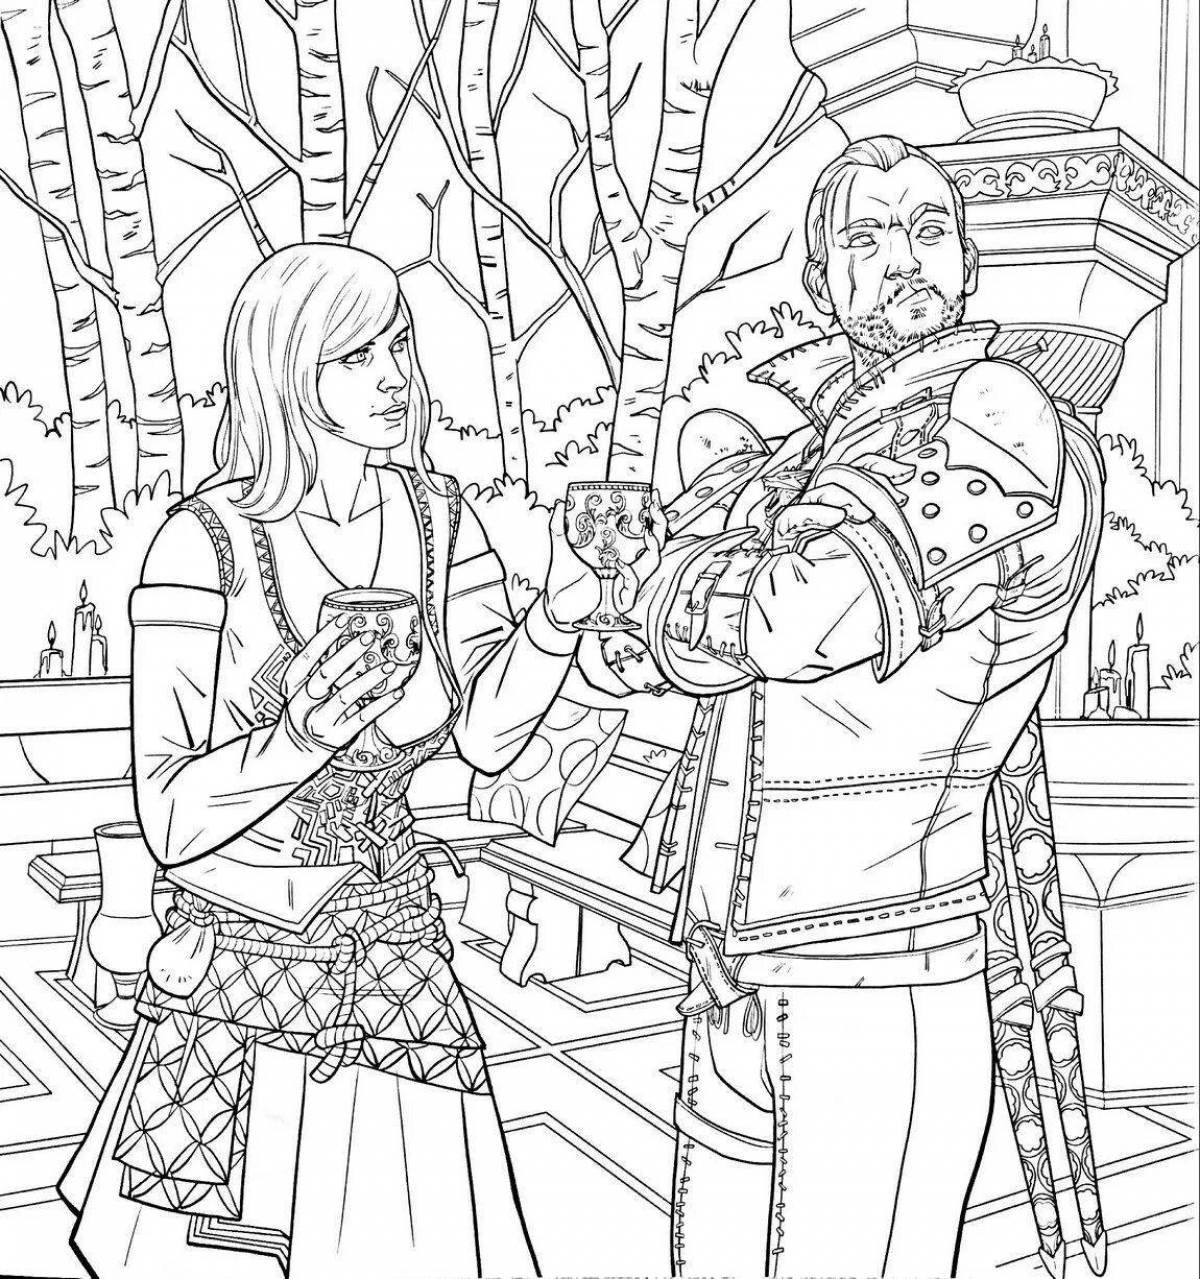 Witcher 3 great coloring book